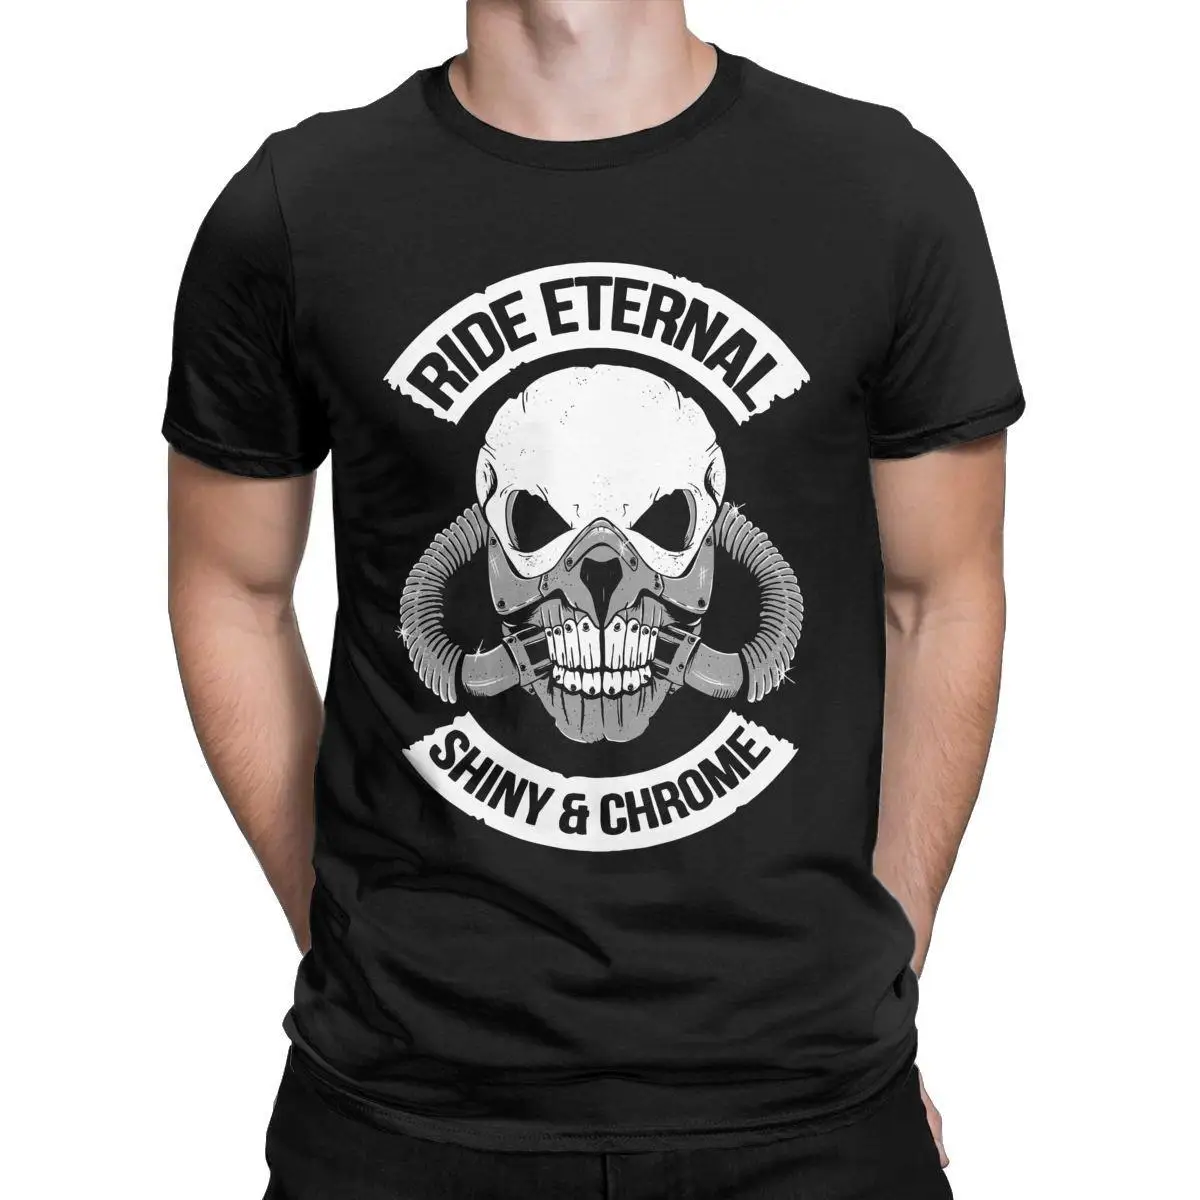 Men Ride Eternal T Shirts Mad Max Fury Road 100% Cotton Clothes Funny Short Sleeve O Neck Tees Printed T-Shirt